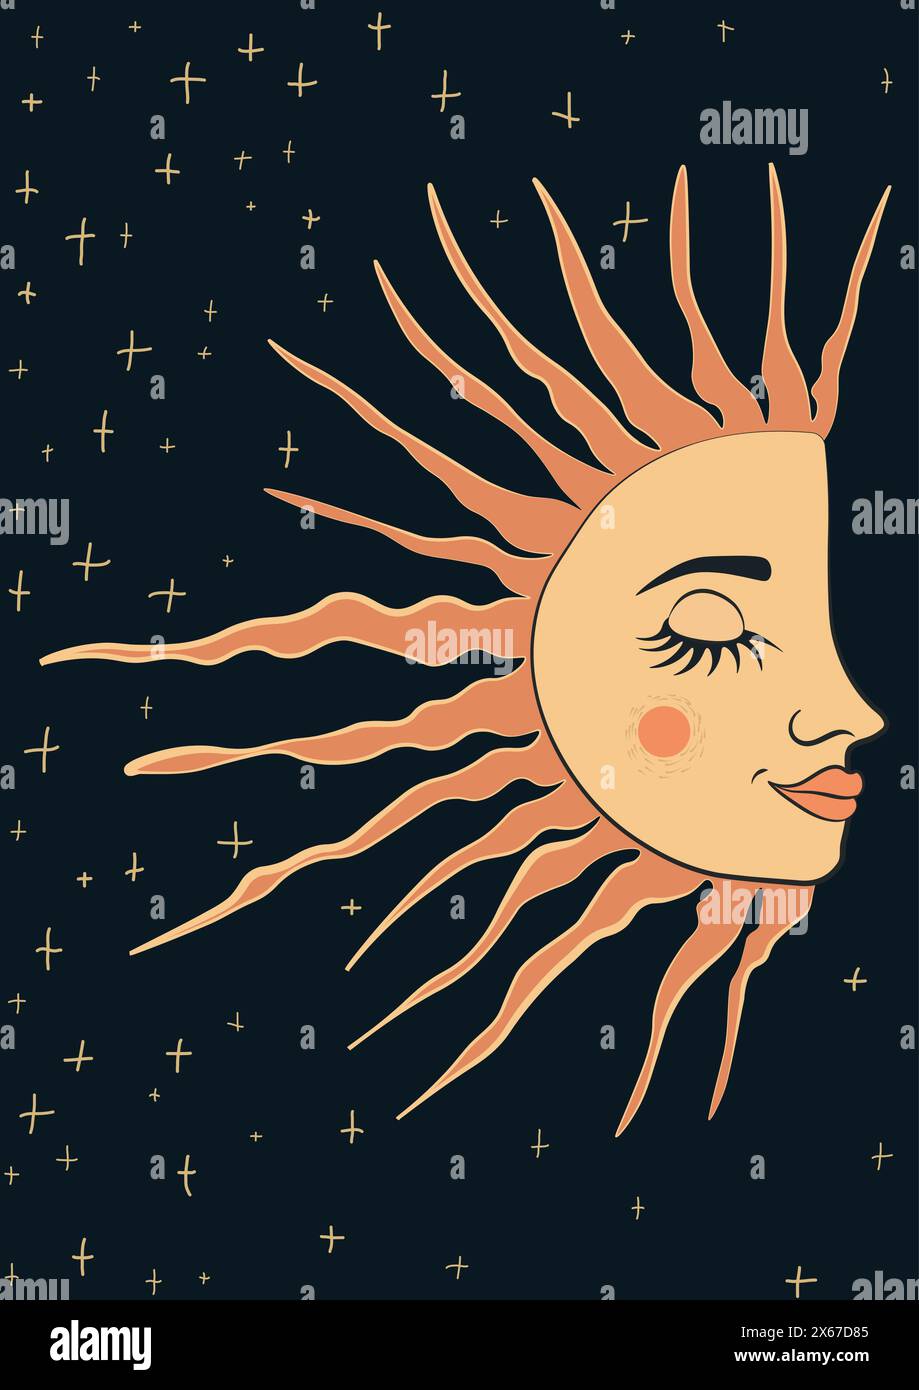 stylized vector illustration of ancient folk representations of the sun and moon. The sun, with a half-face design featuring plump lips and closed eye Stock Vector